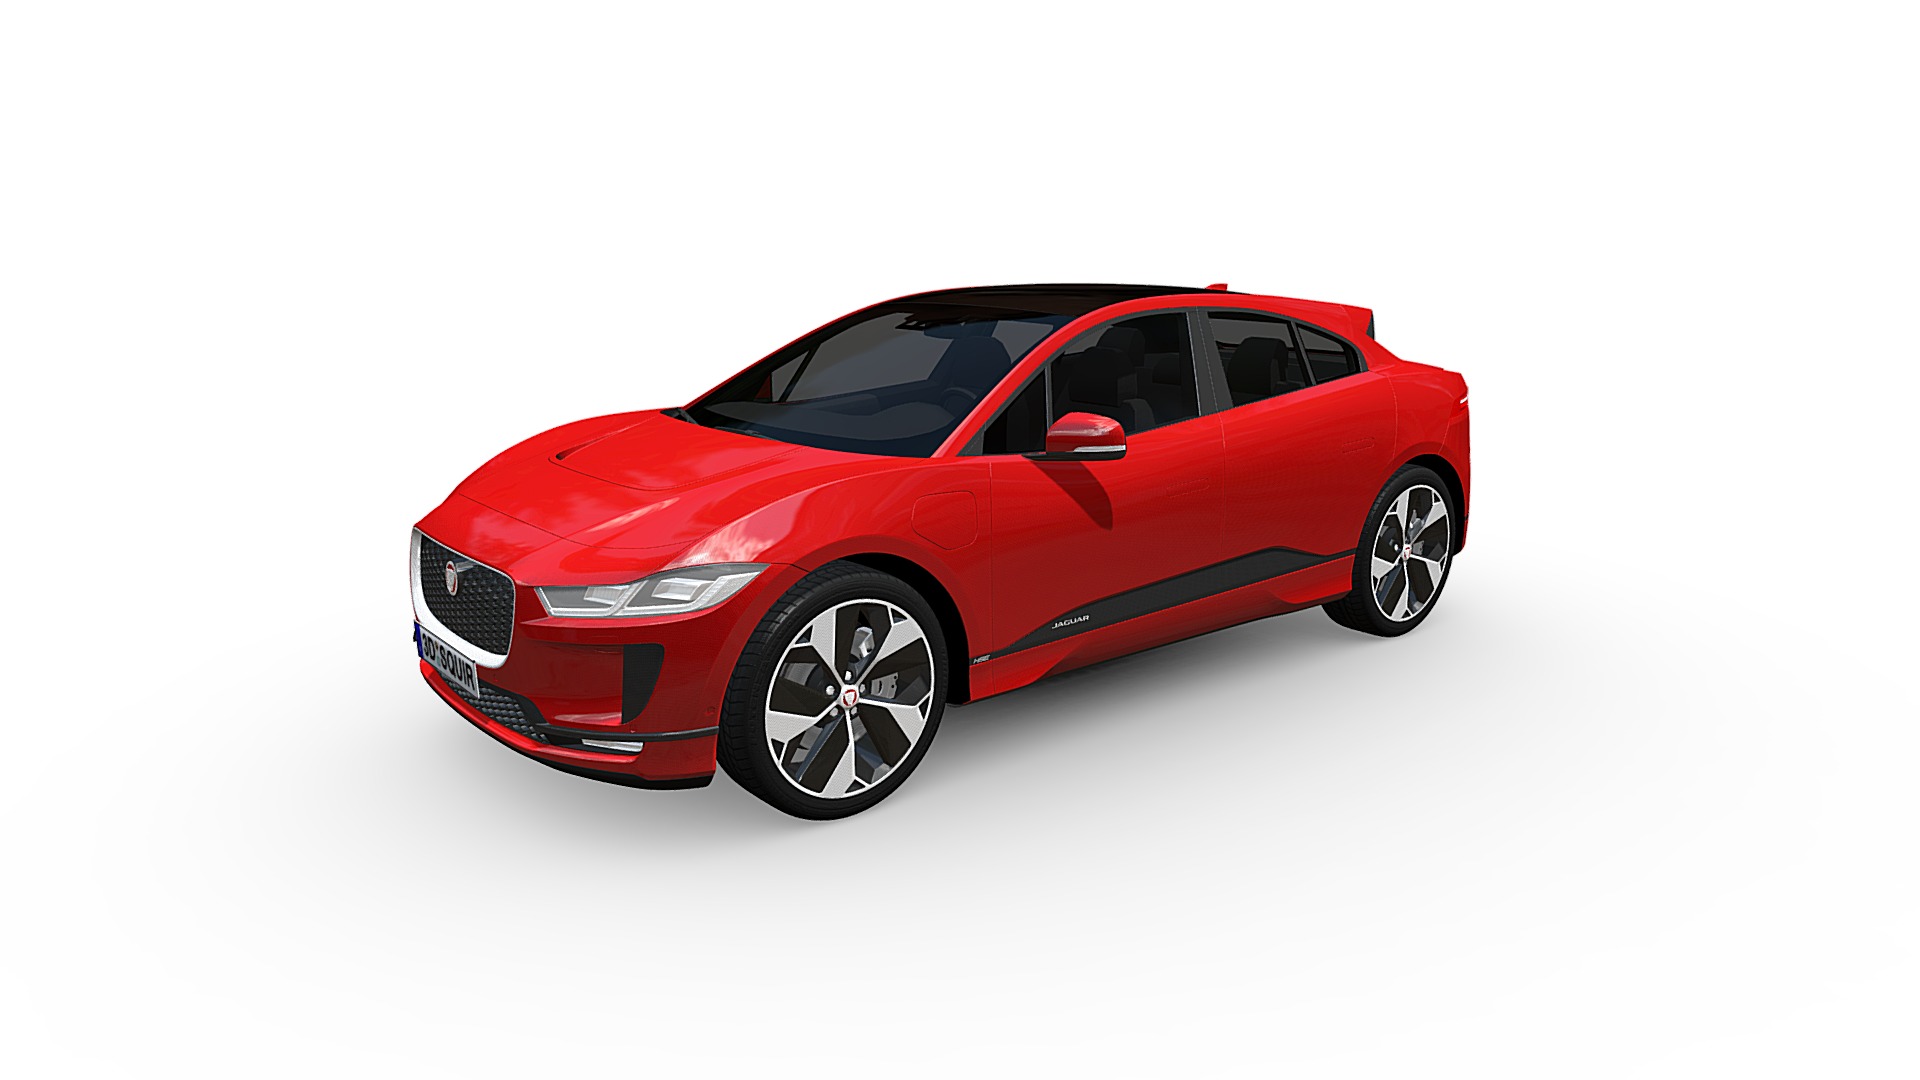 3D model Jaguar I-Pace 2018 - This is a 3D model of the Jaguar I-Pace 2018. The 3D model is about a red car with a white background.